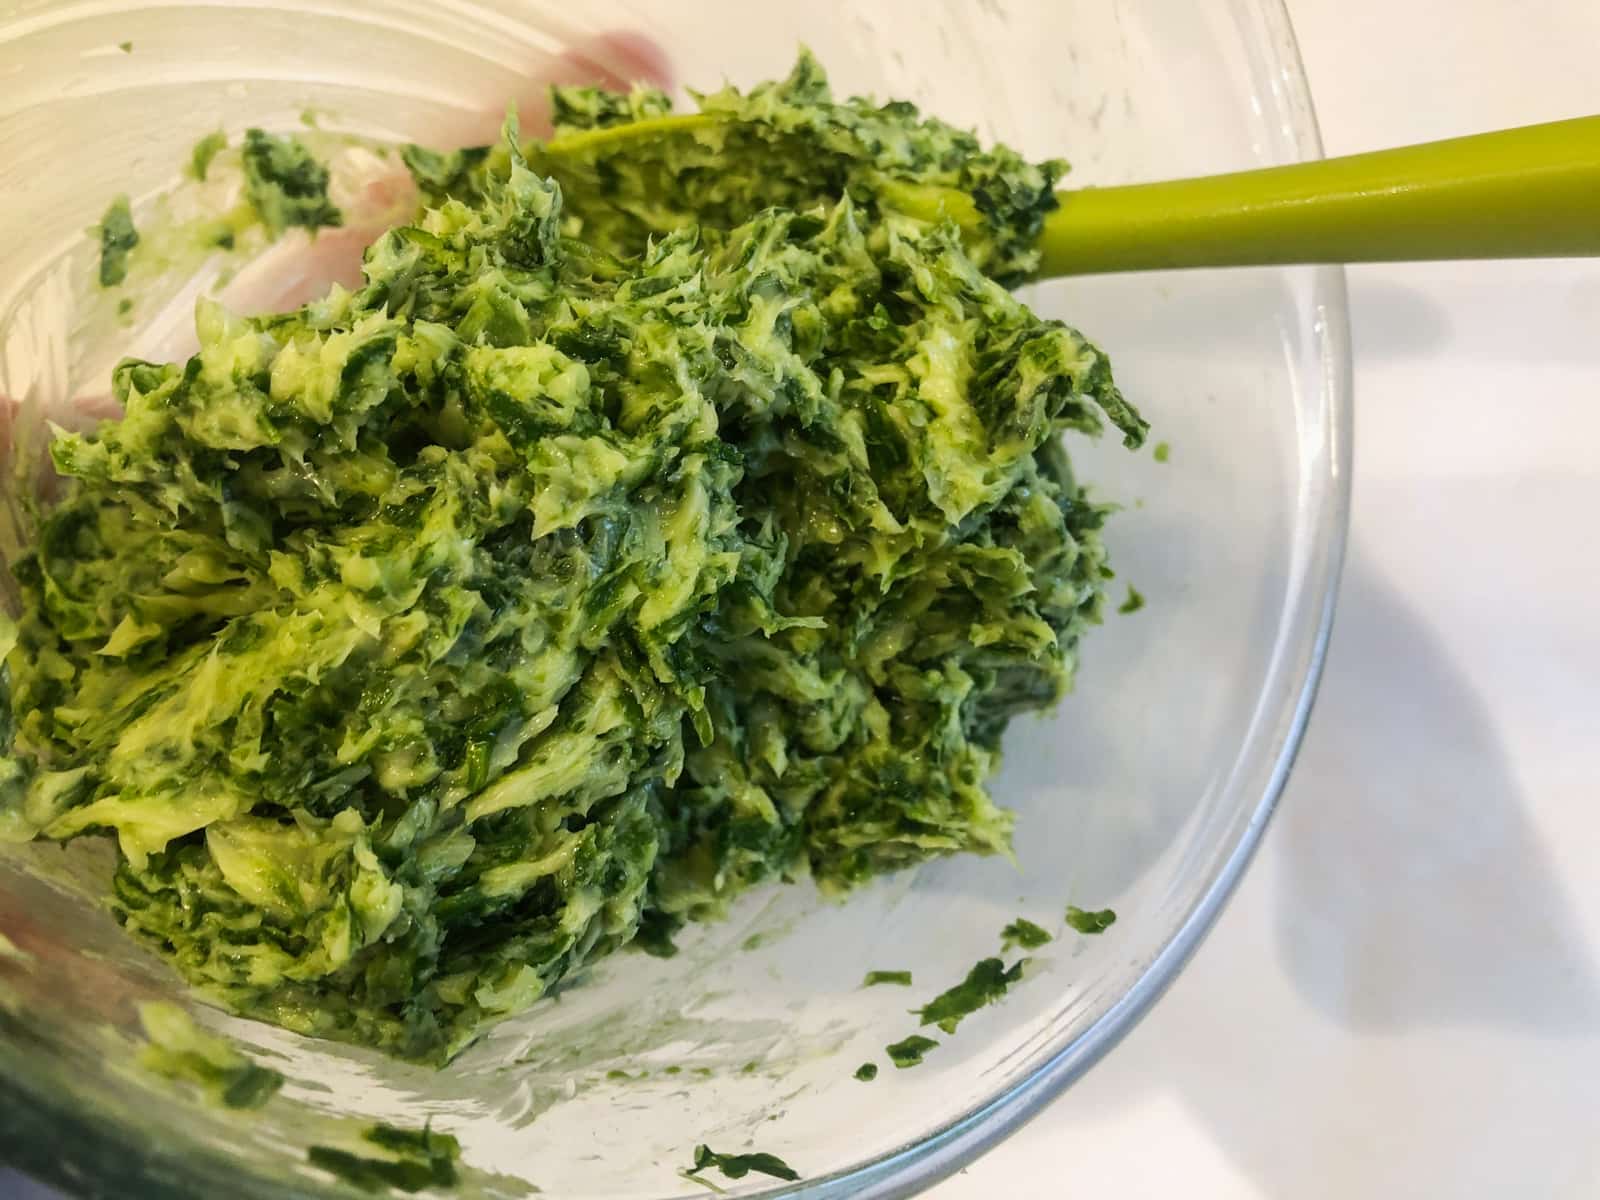 chopped wild garlic leaves mixed with butter to make wild garlic butter.